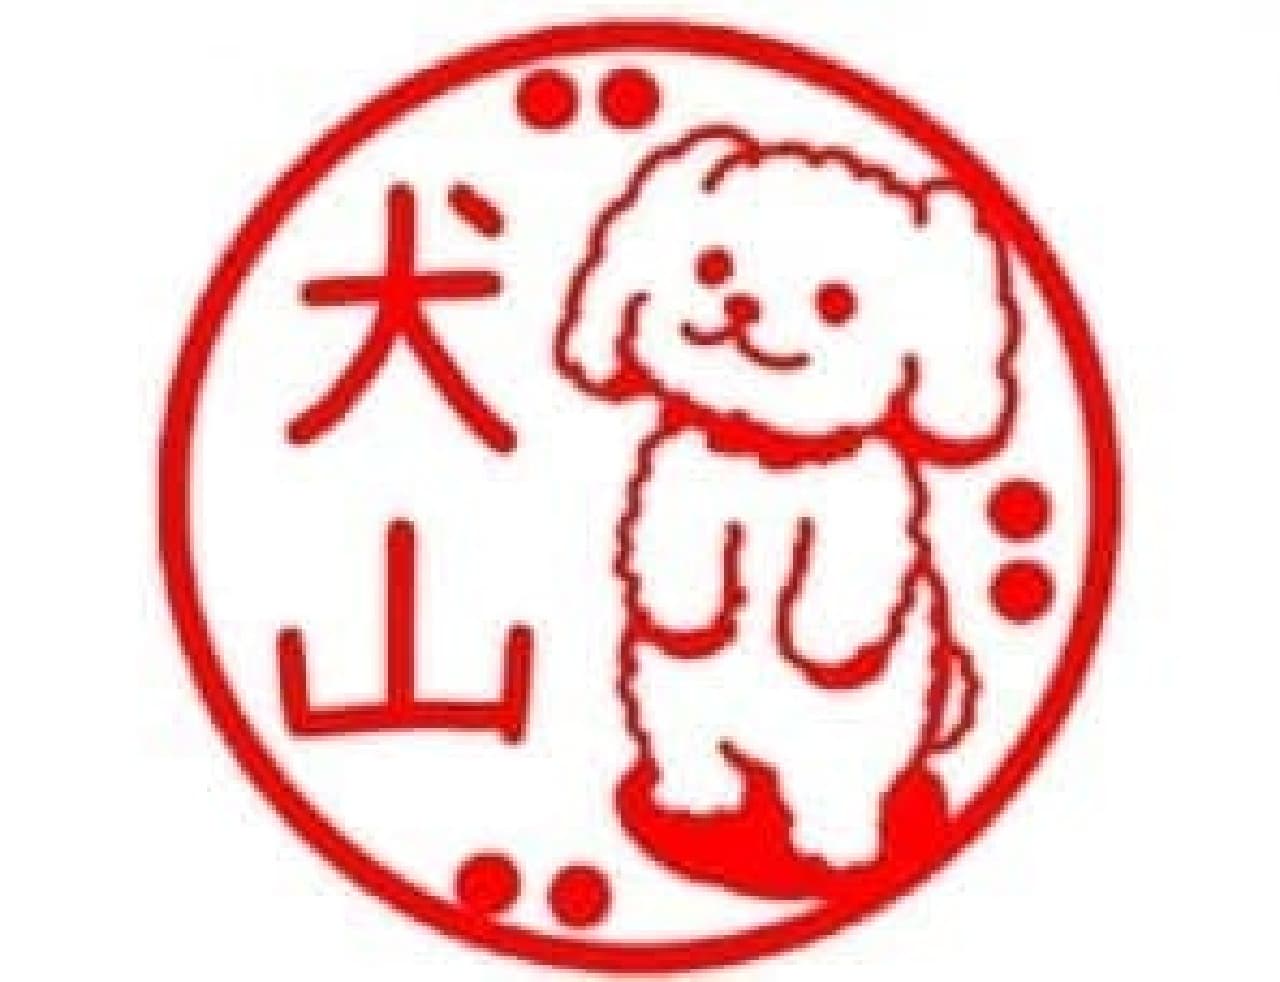 17 dog breeds added to "Inuzukan", a seal with an illustration of a dog